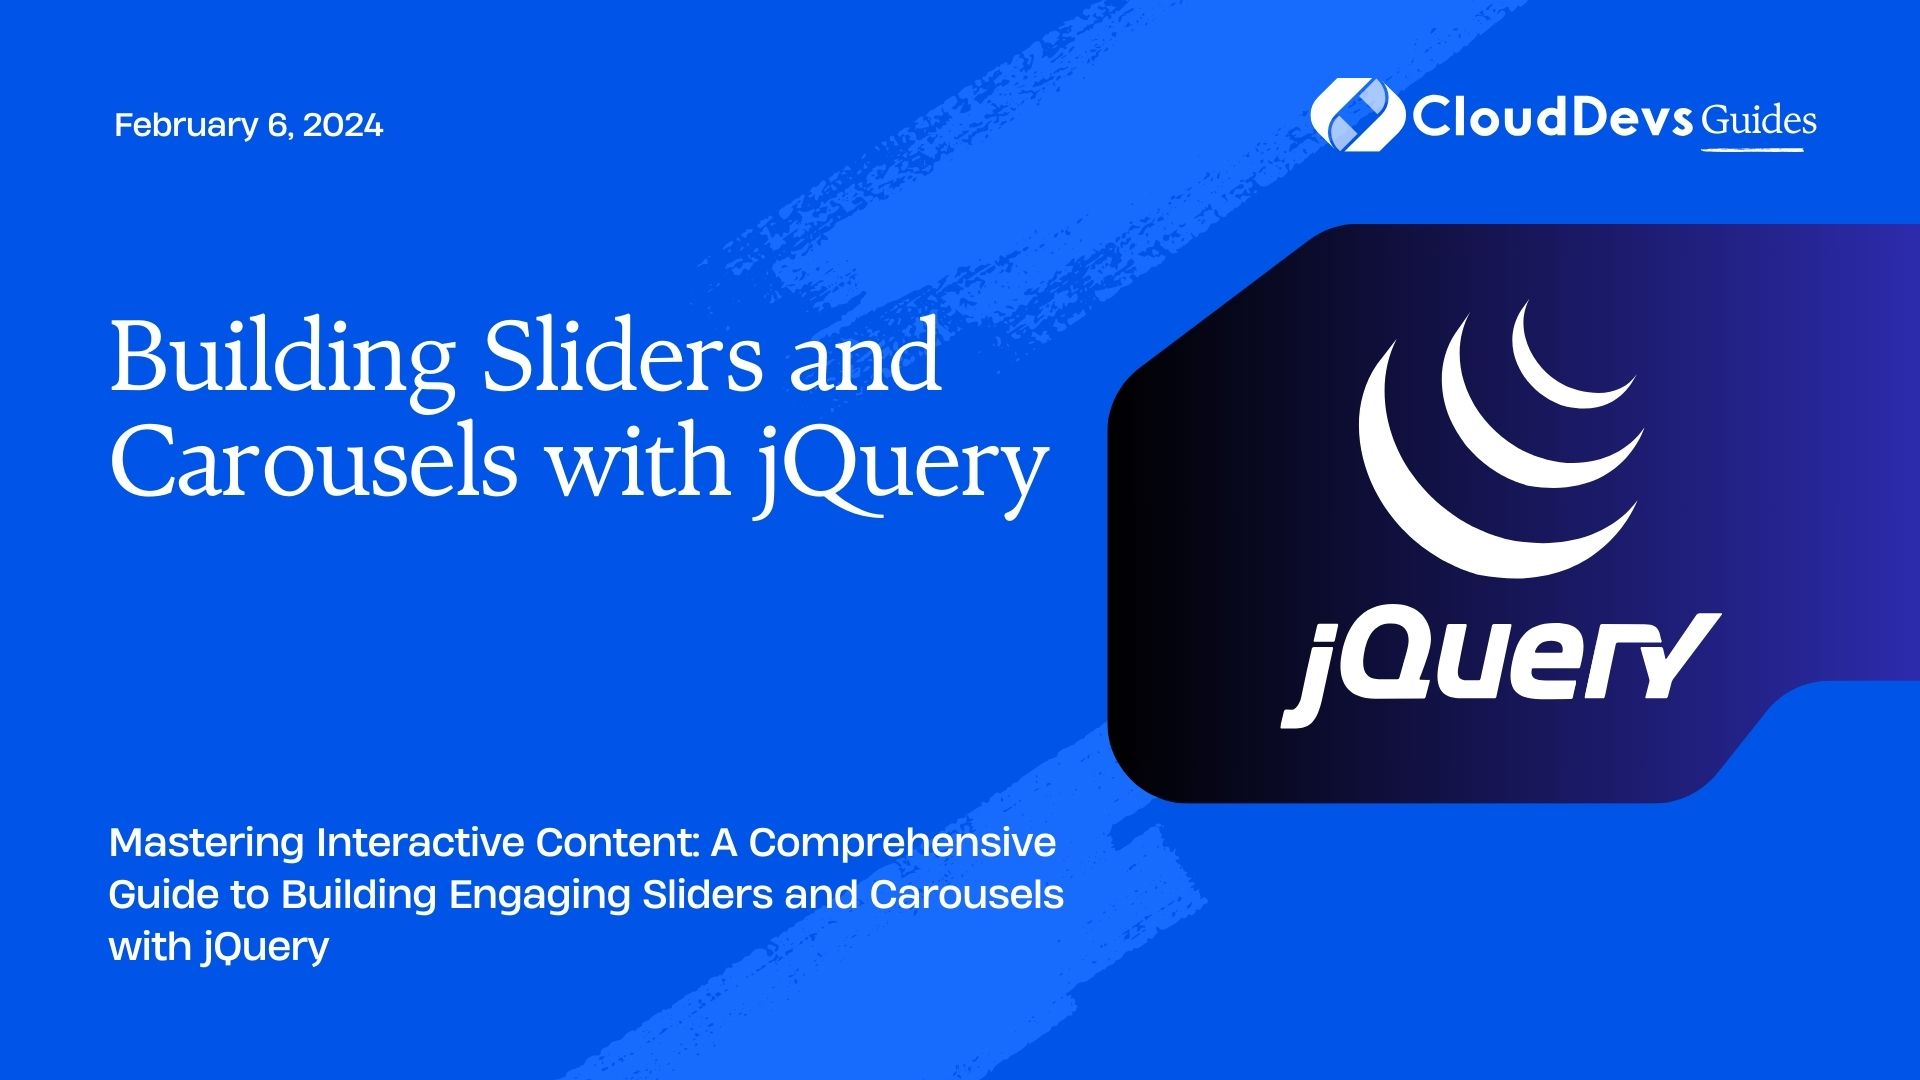 Building Sliders and Carousels with jQuery